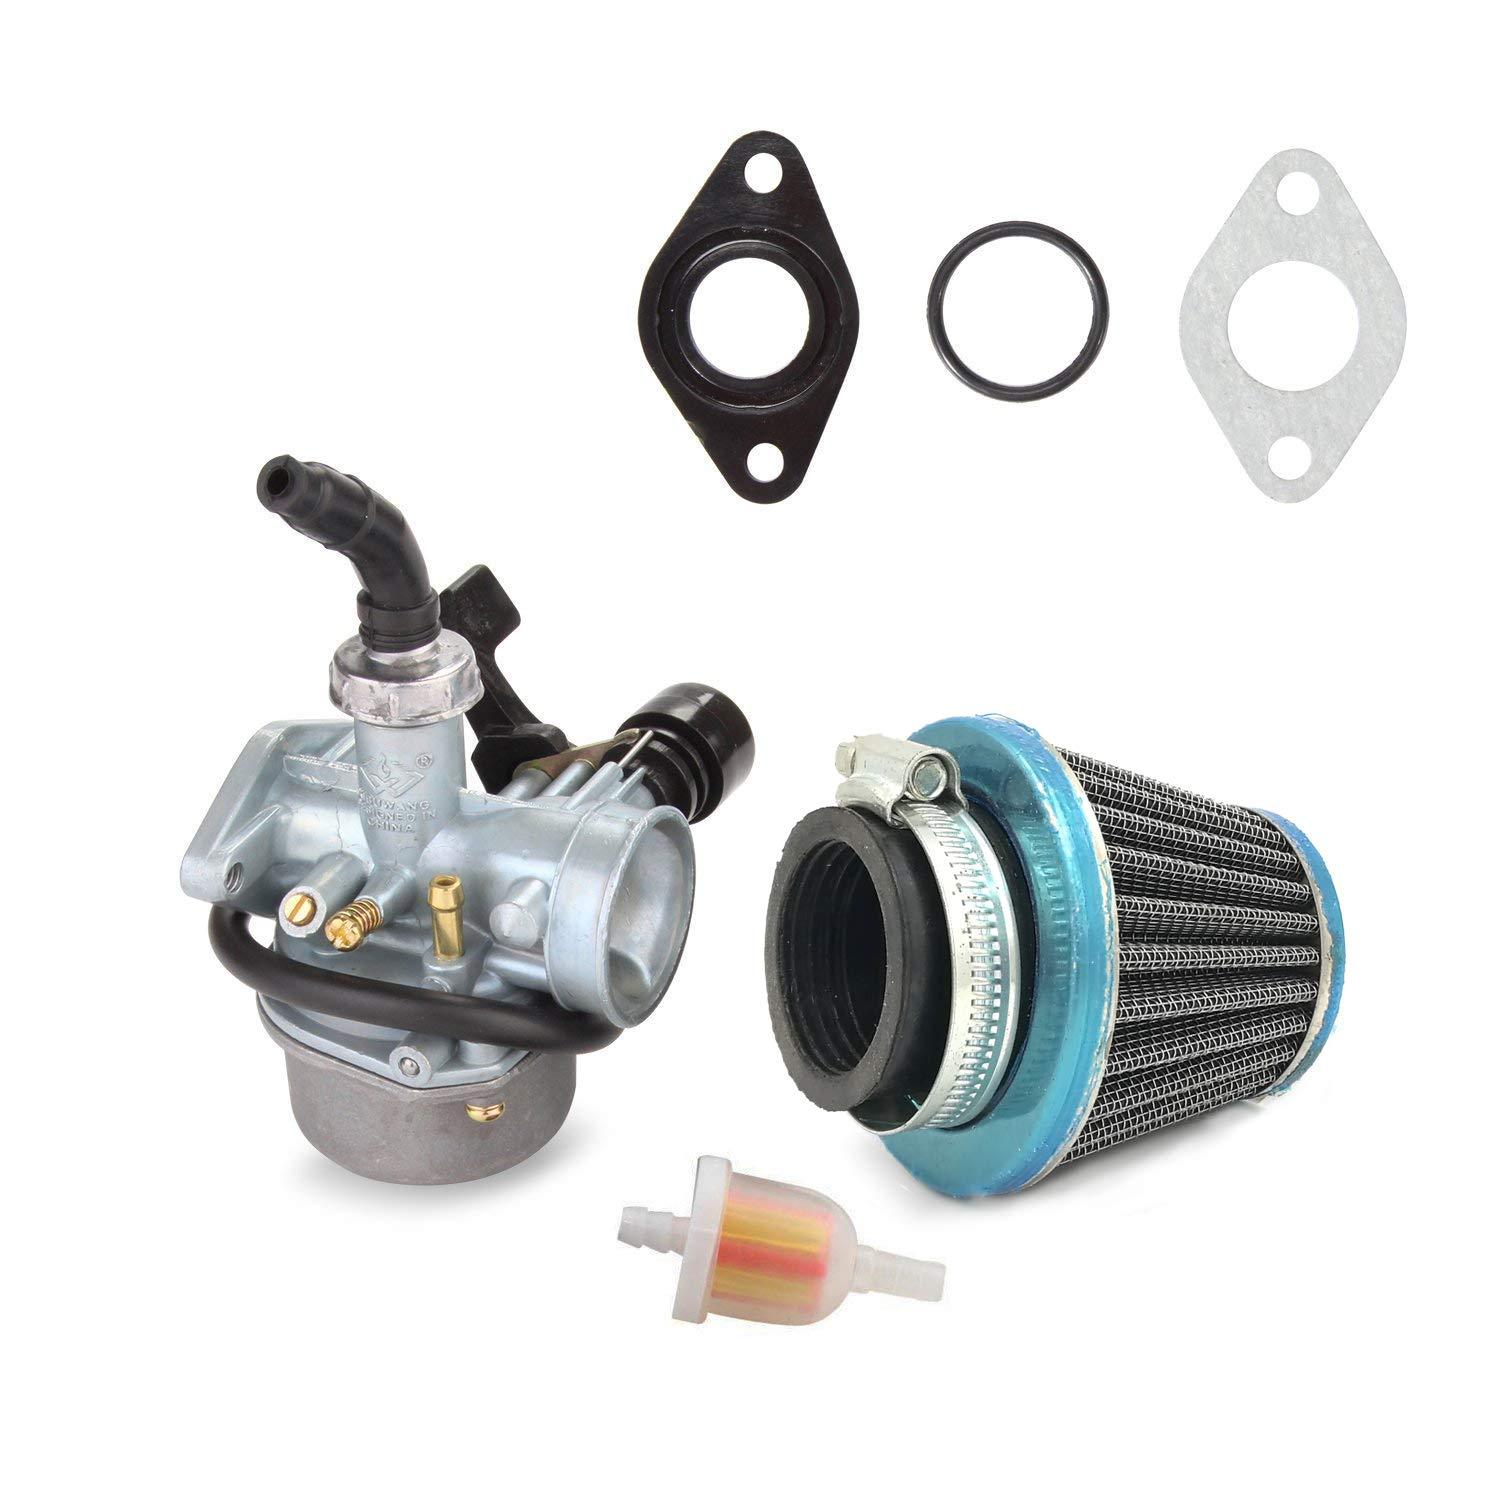 Atv Pz19 With Fuel Filter And 35Mm Air Filter For 50Cc 70Cc 80Cc 90Cc